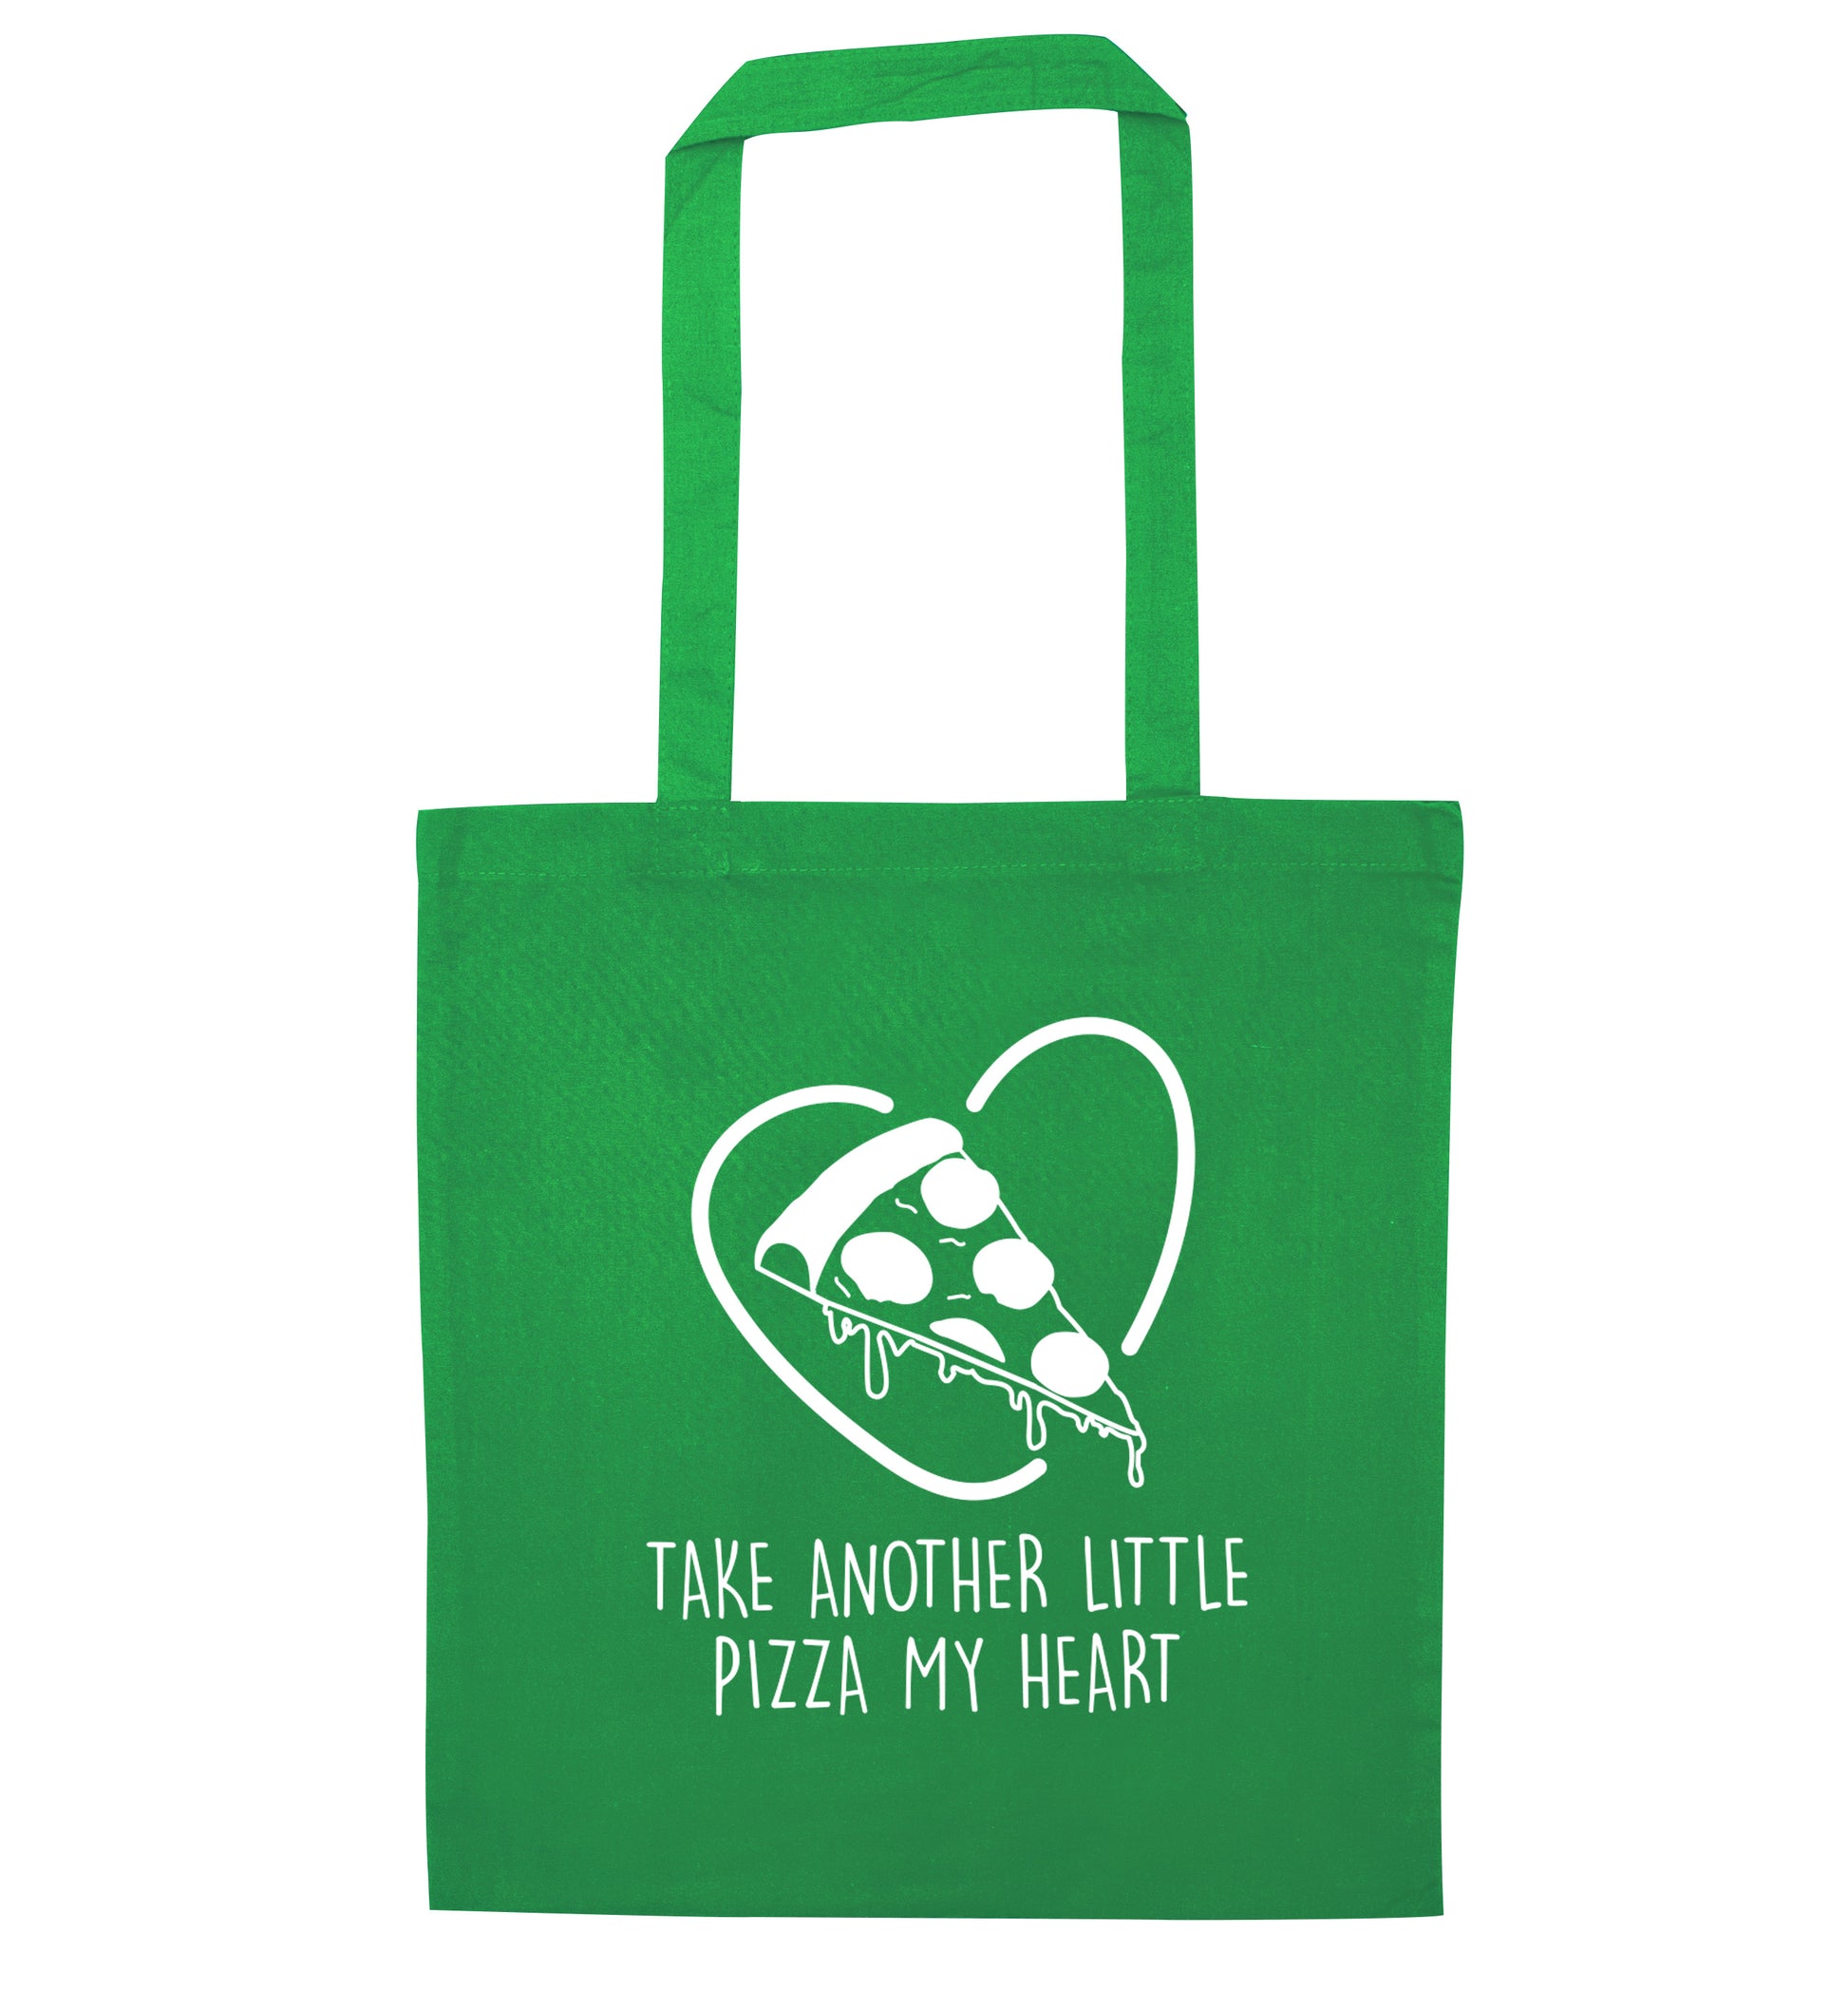 Take another little pizza my heart green tote bag